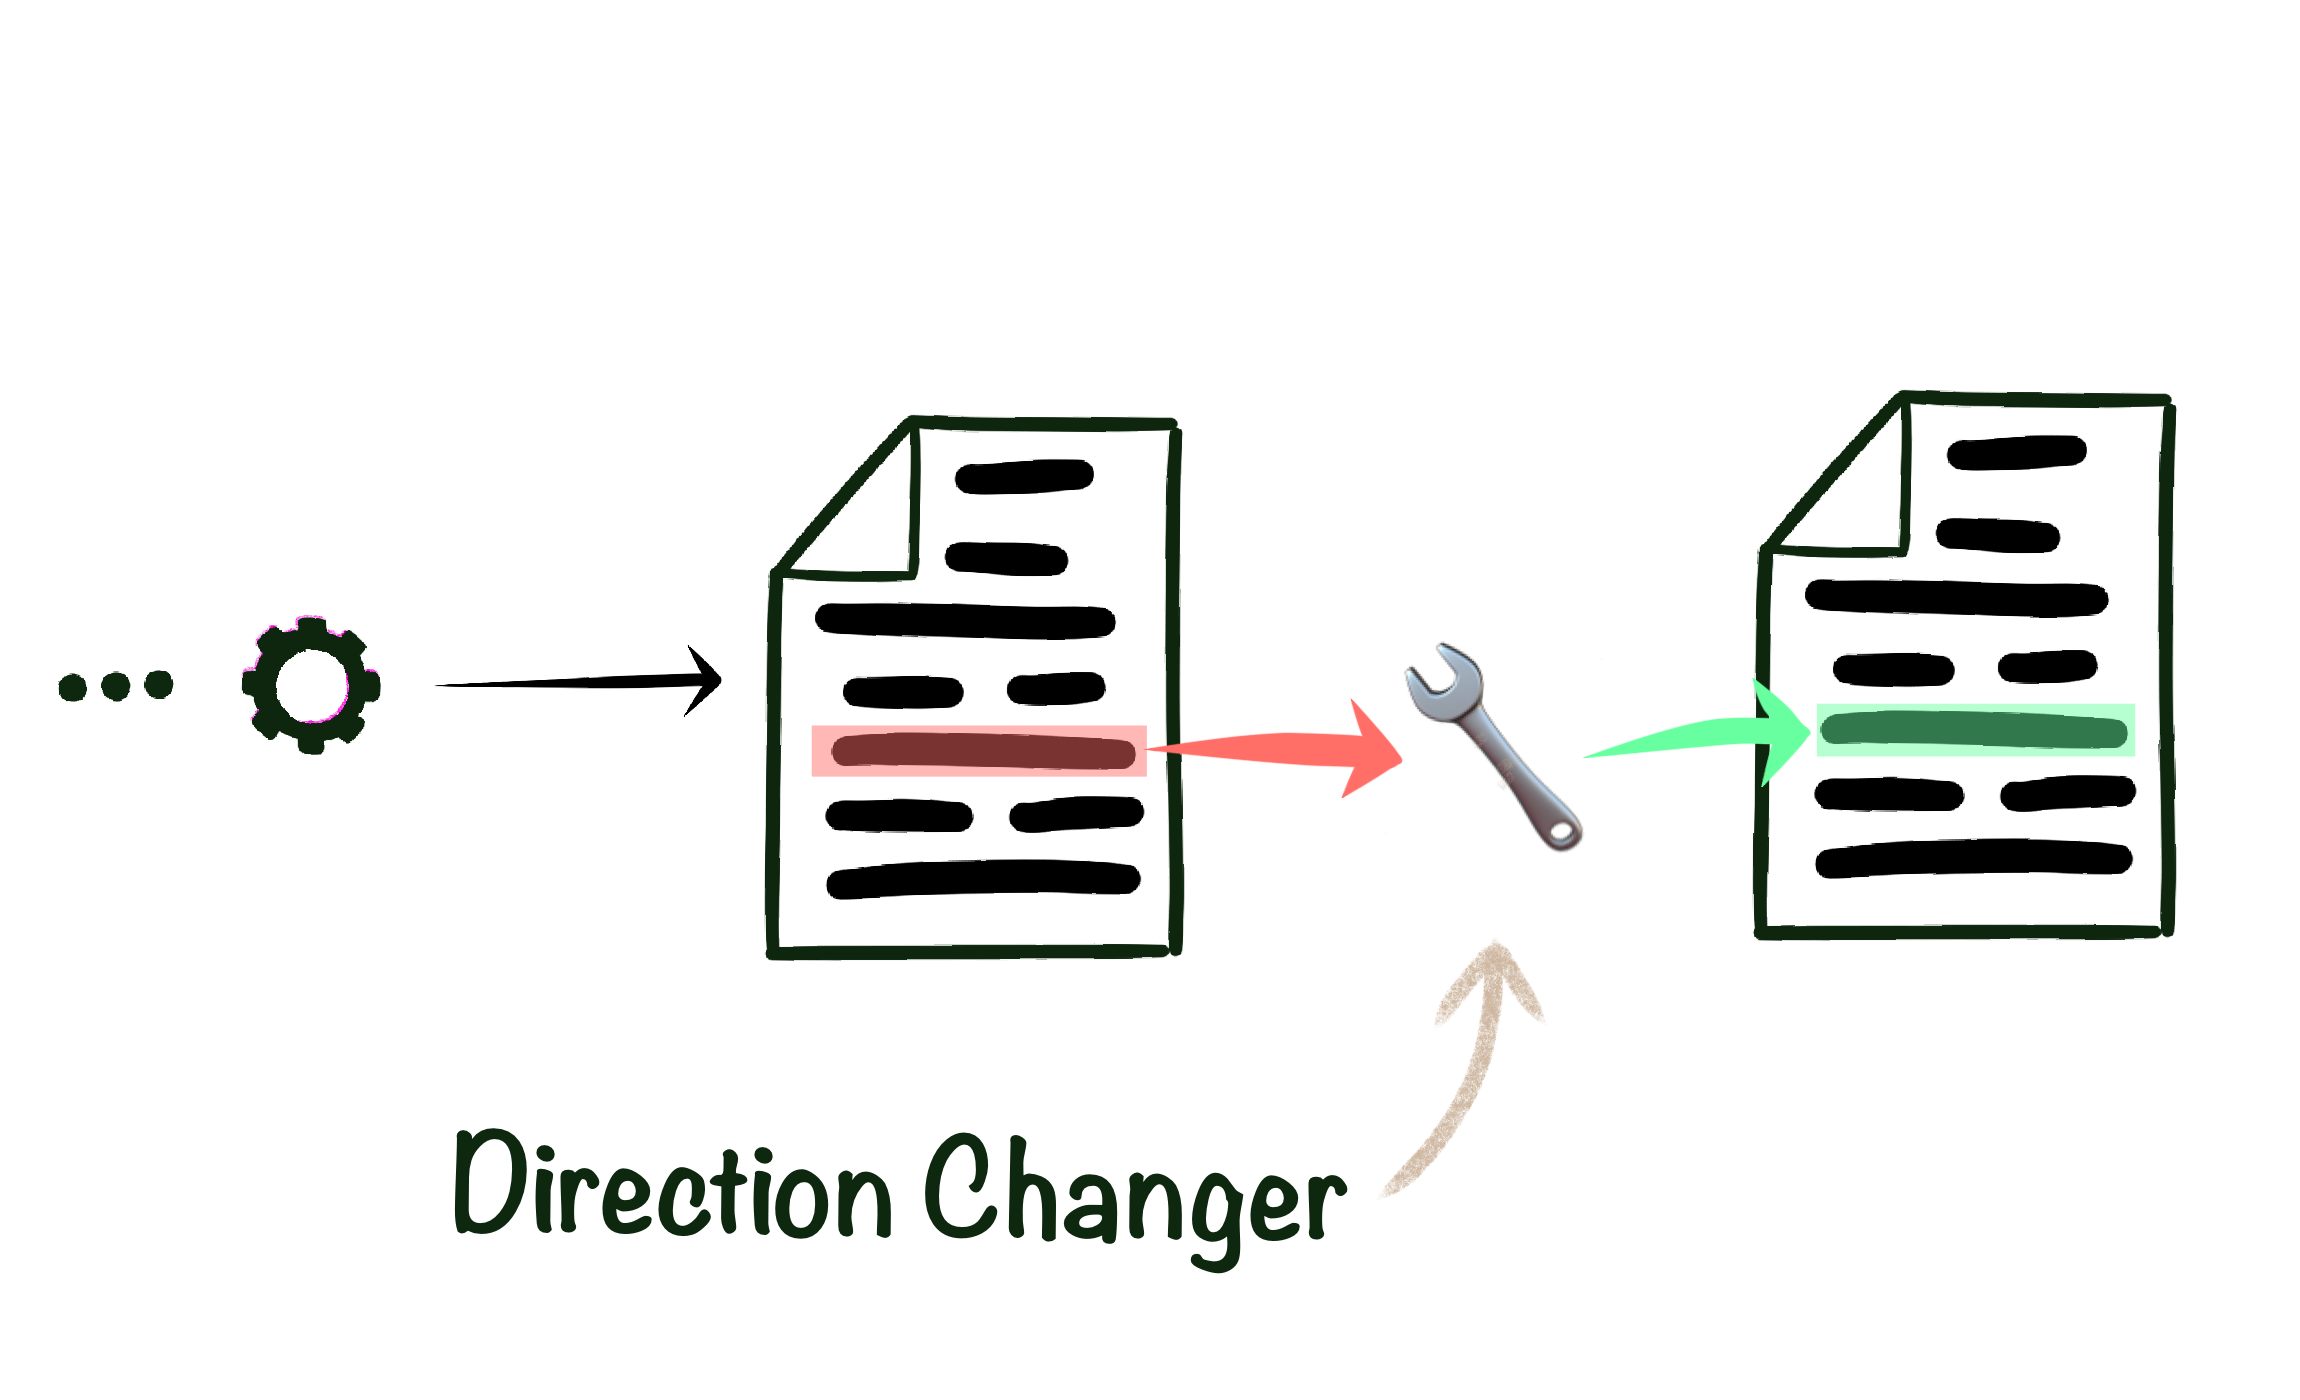 Direction Changer